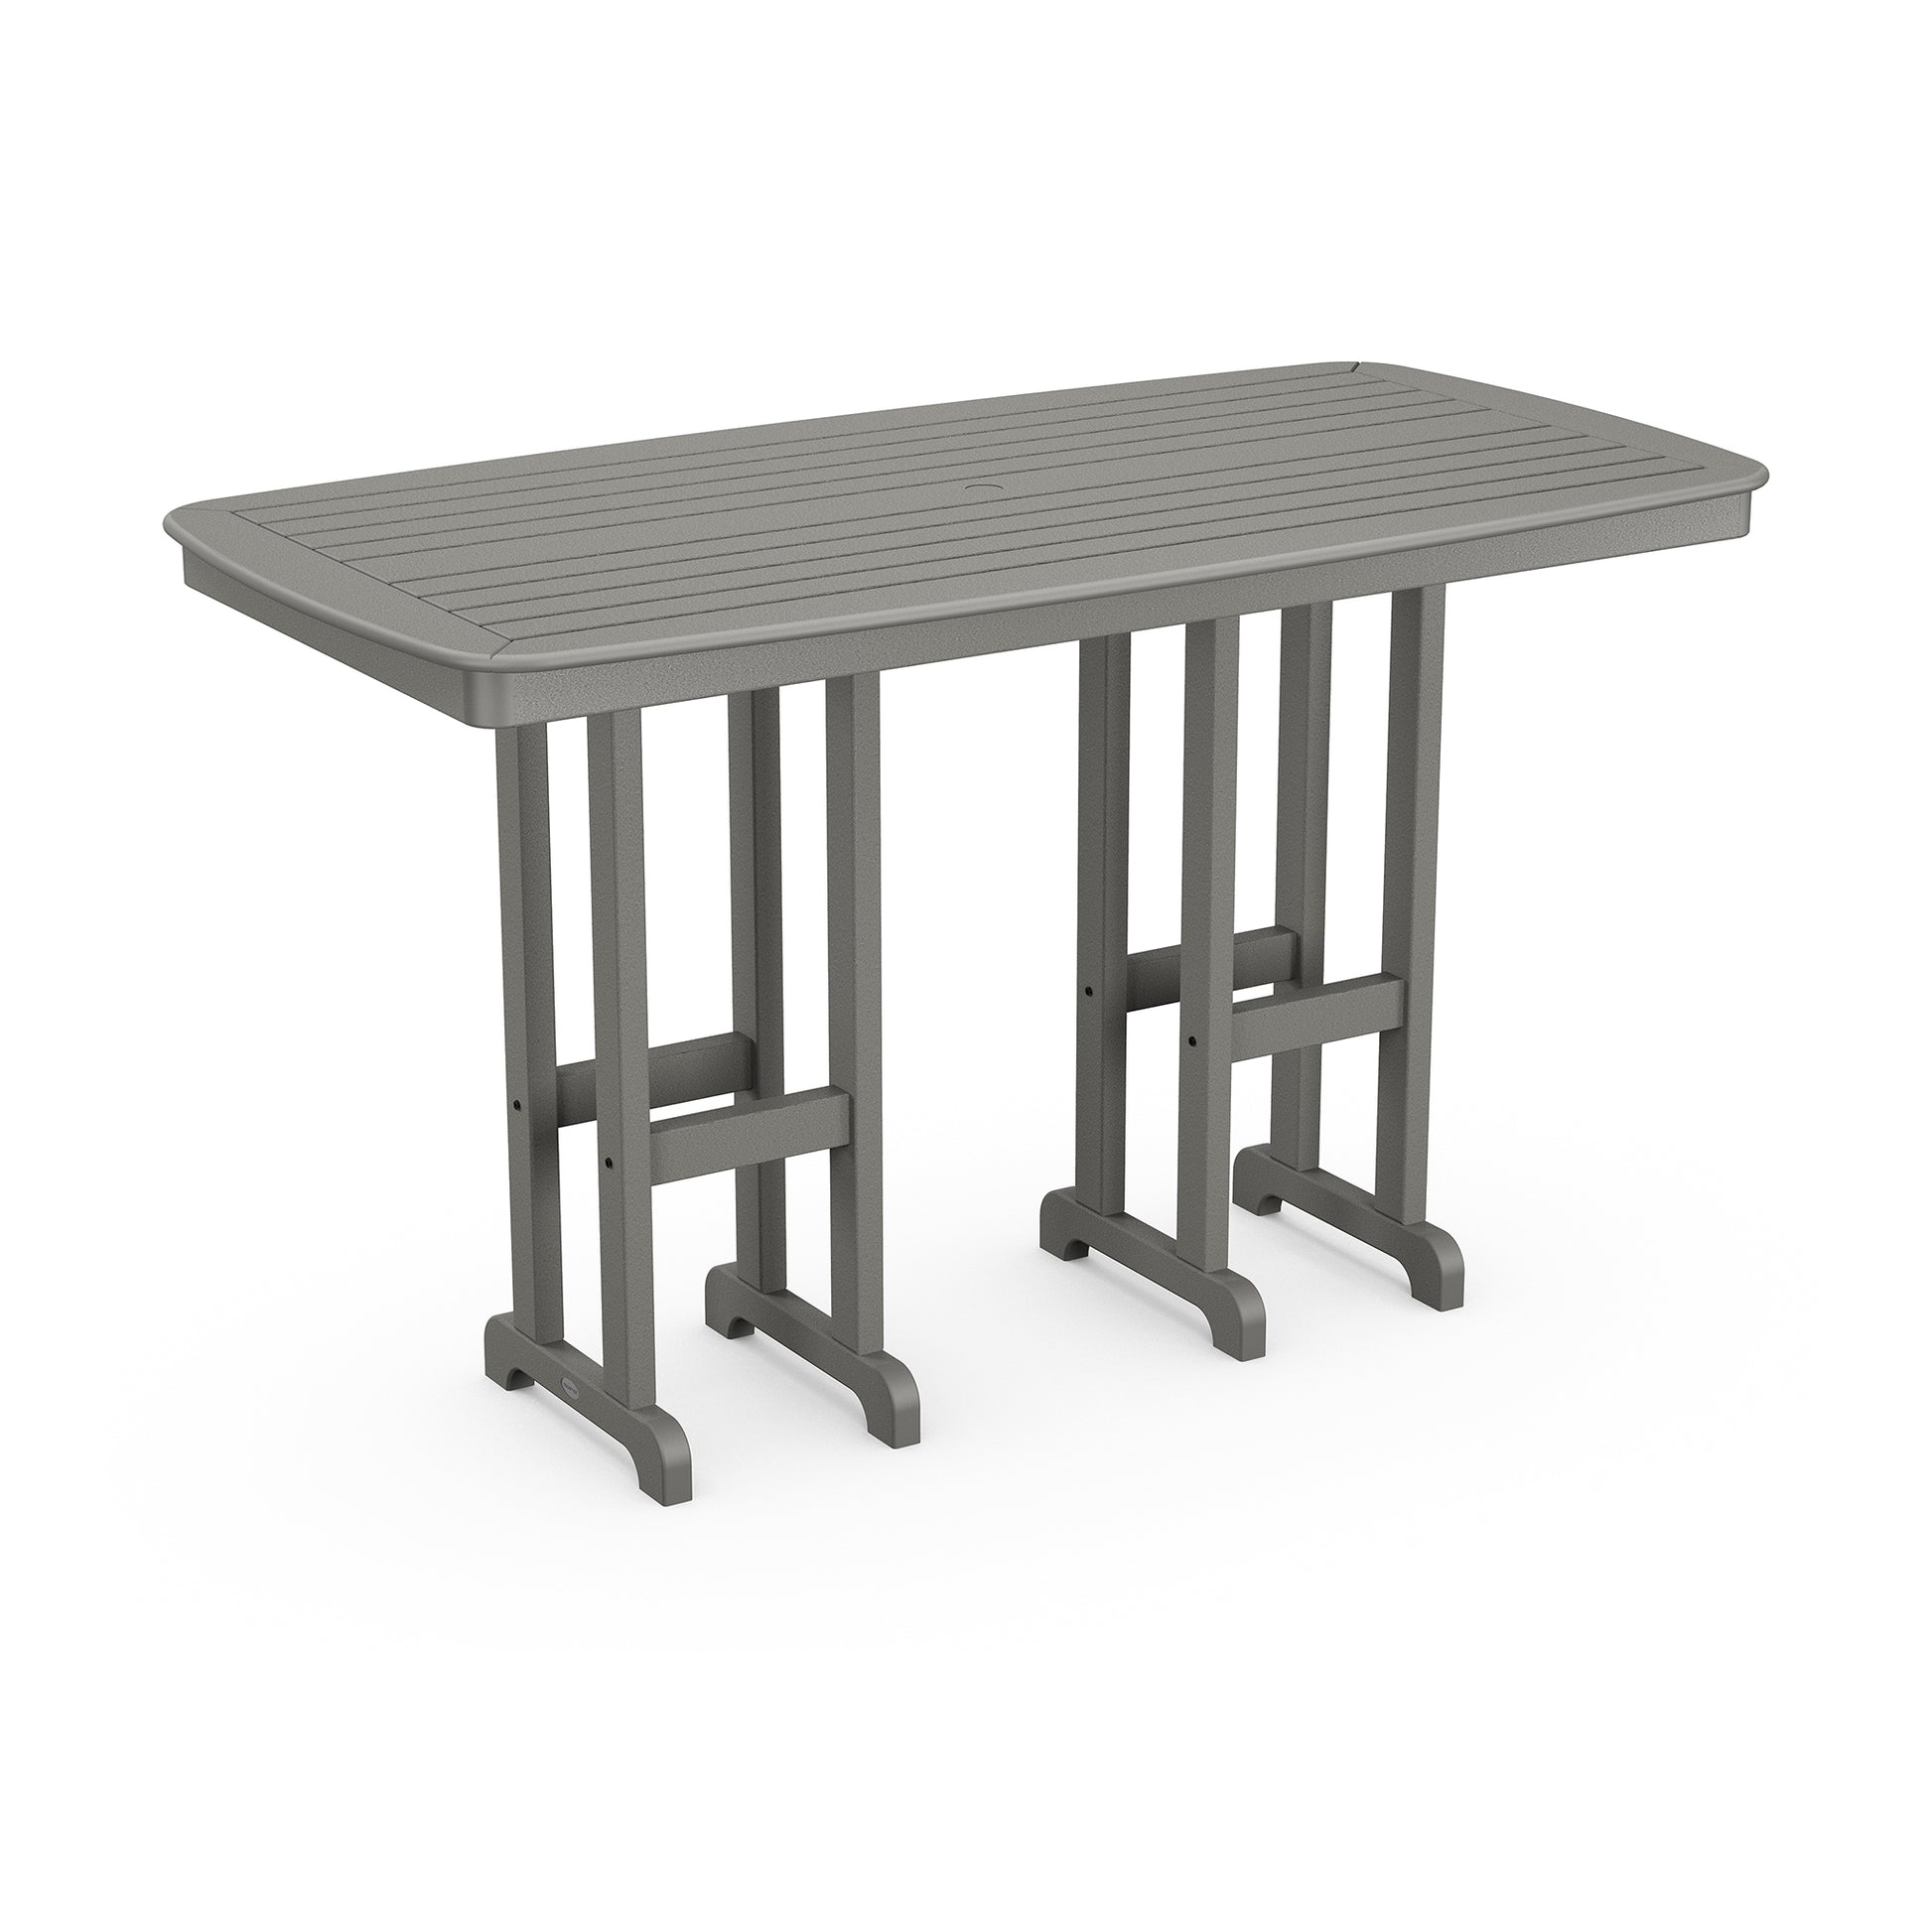 A rectangular outdoor dining table made of gray slatted POLYWOOD Nautical 37" x 72" Bar Table with metal legs, displayed on a white background.